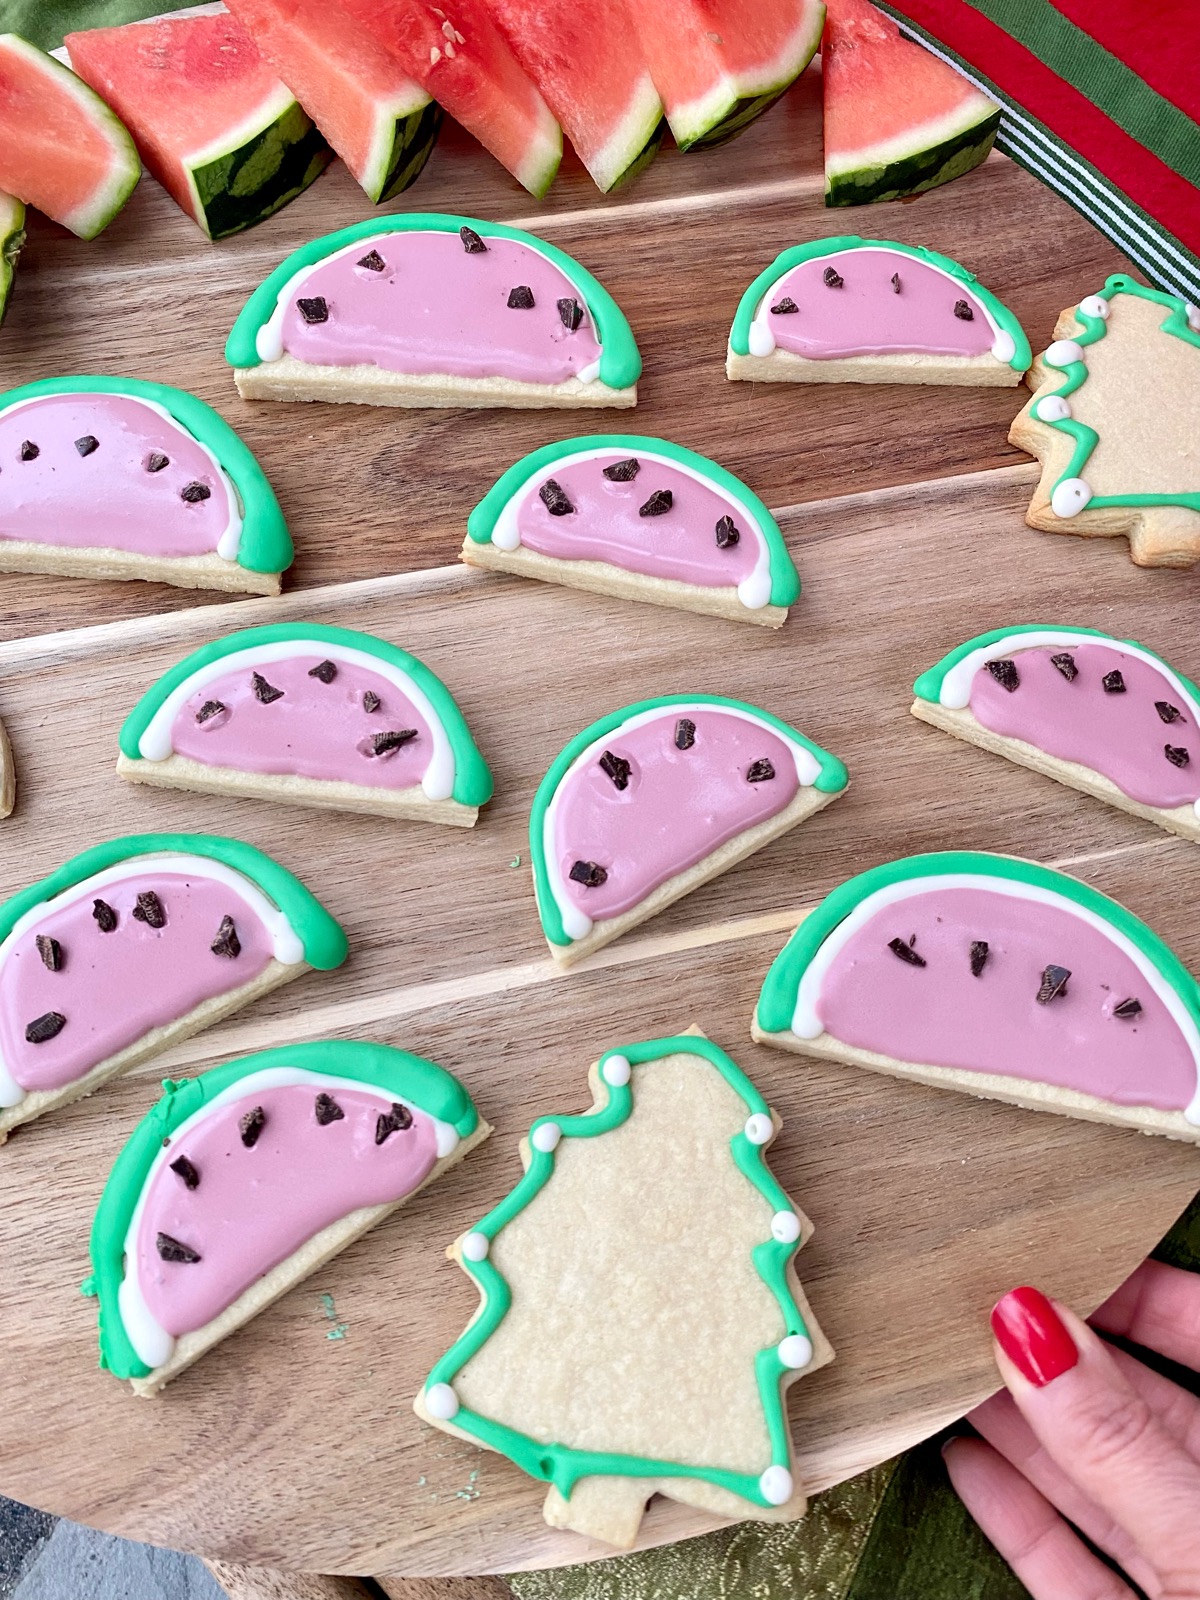 Easy Cut Out Cookies Recipe - Oven Hug